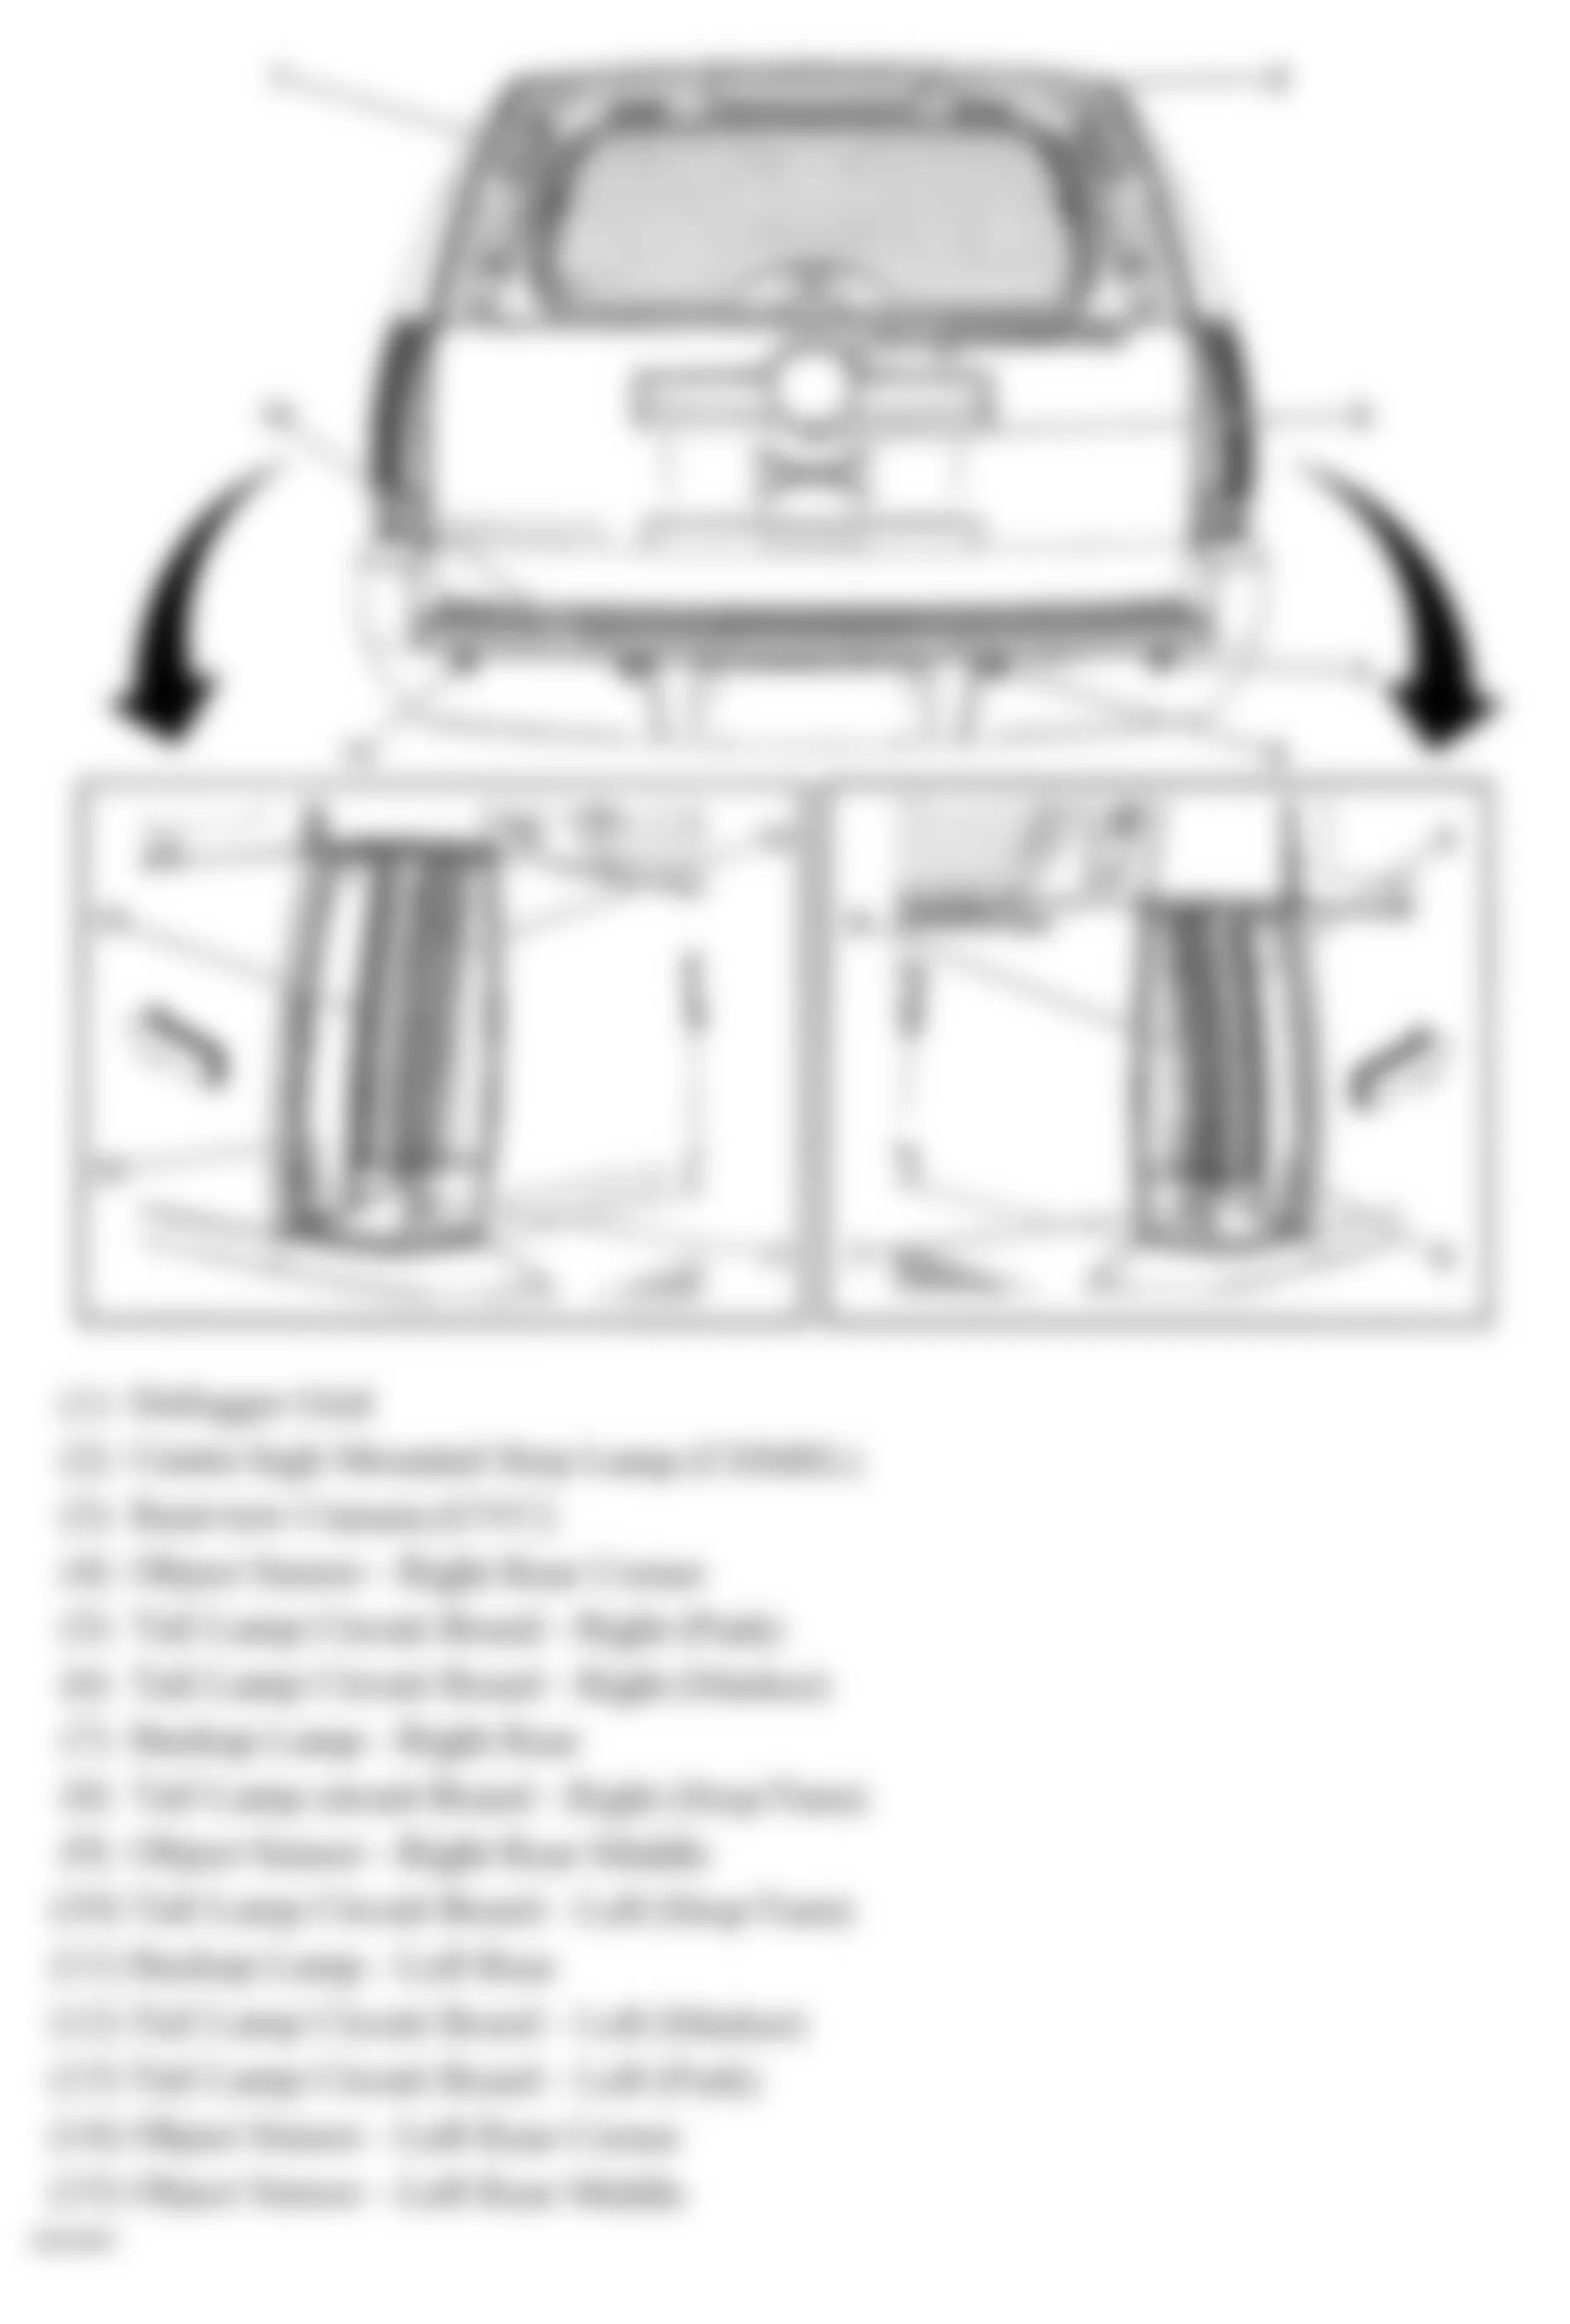 GMC Yukon Hybrid 2009 - Component Locations -  Rear Of Vehicle (Tahoe & Escalade W/One Piece Liftgate)